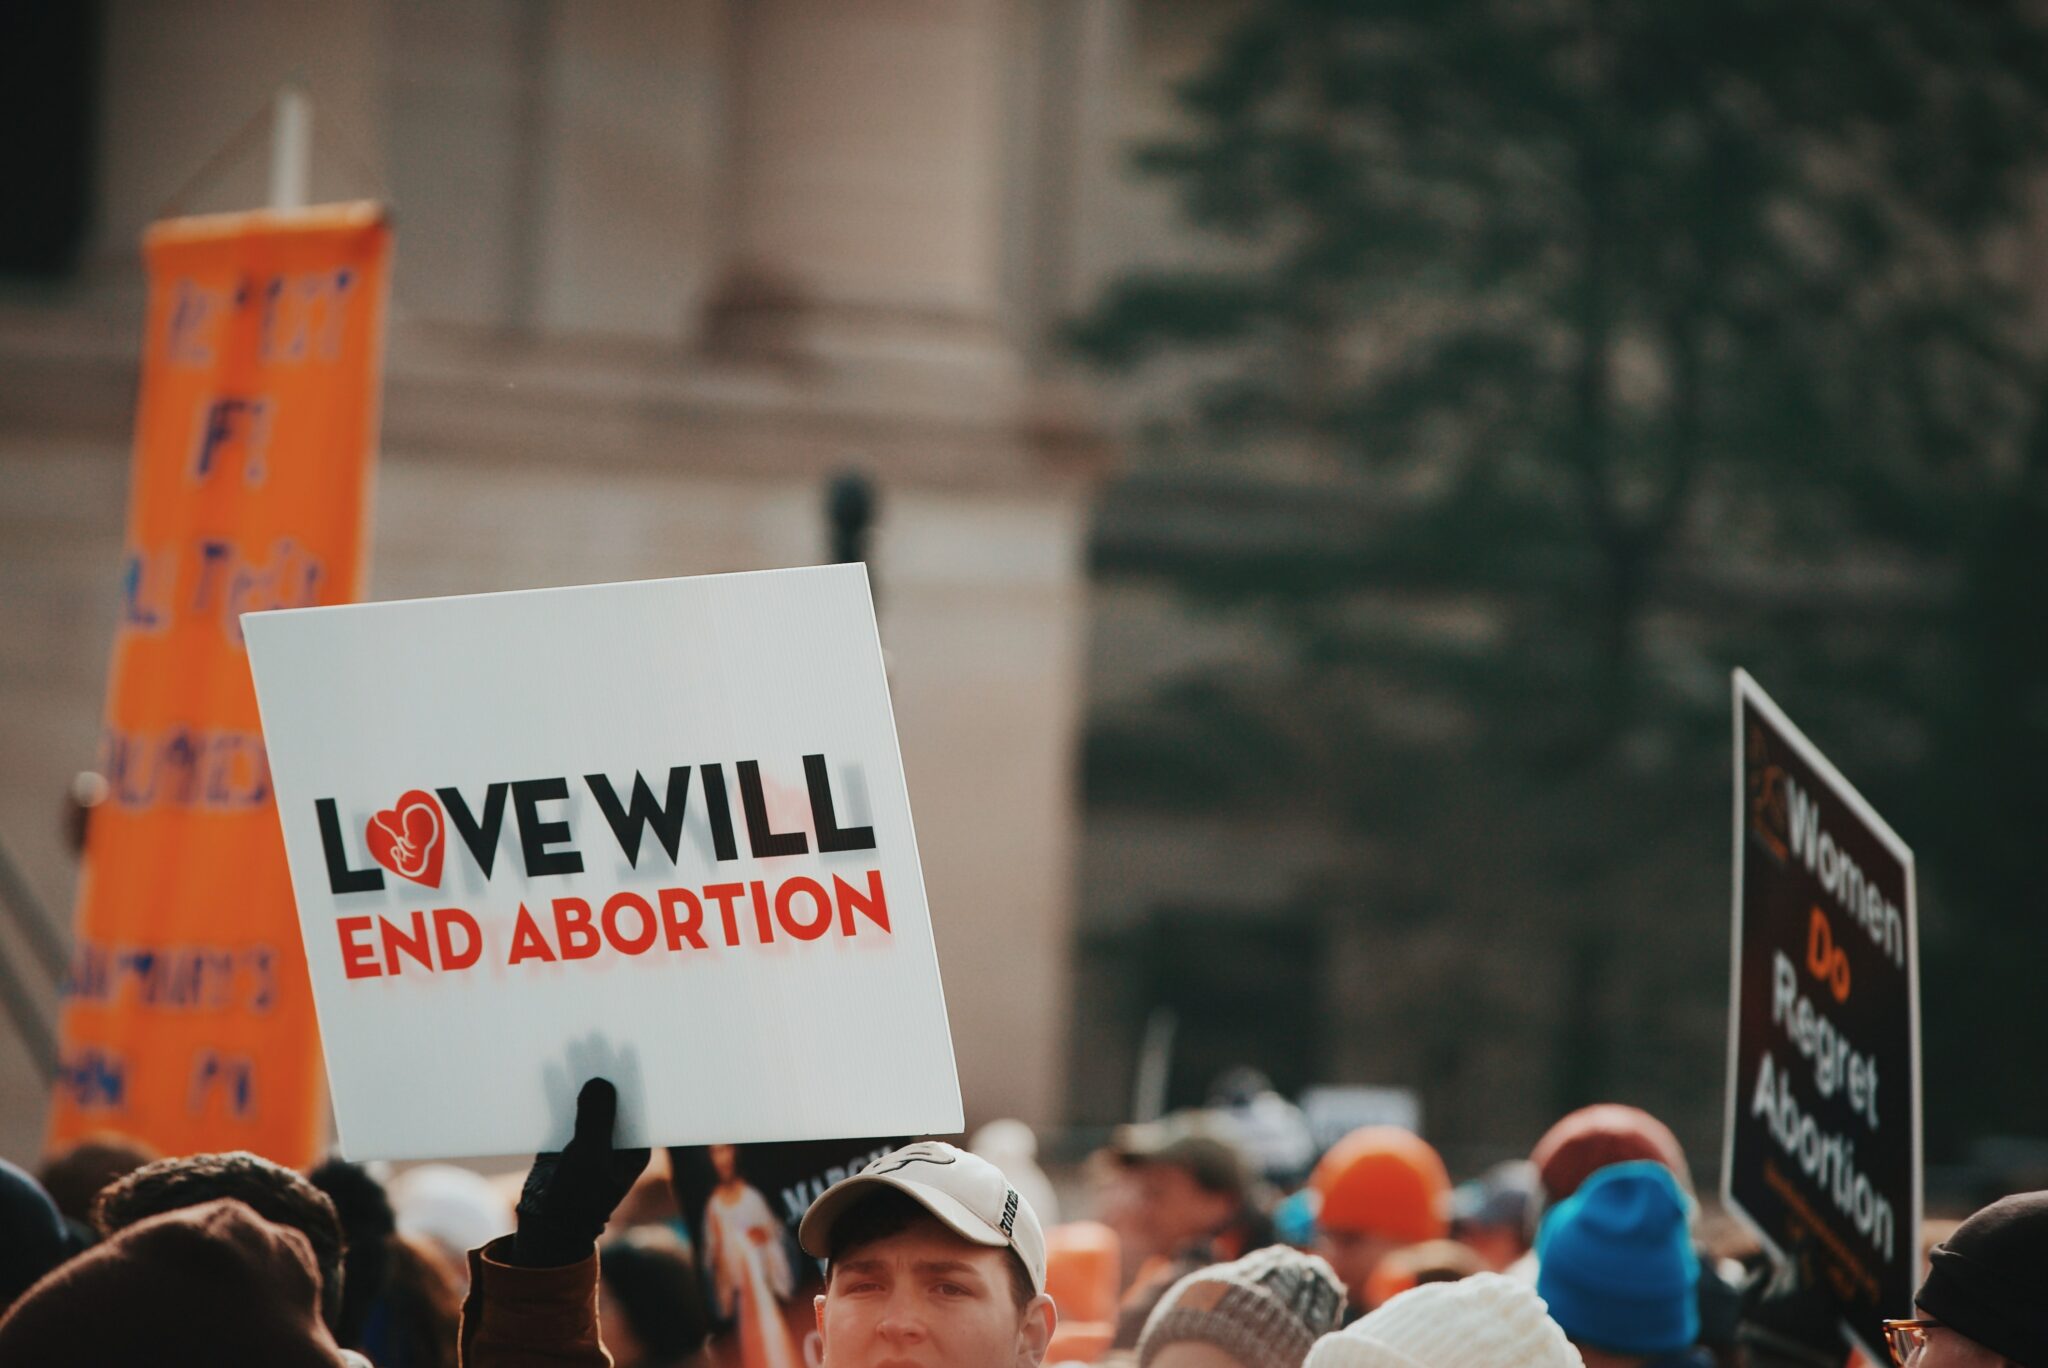 Land Center to host online discussion on the future of the pro-life movement after Roe v. Wade​